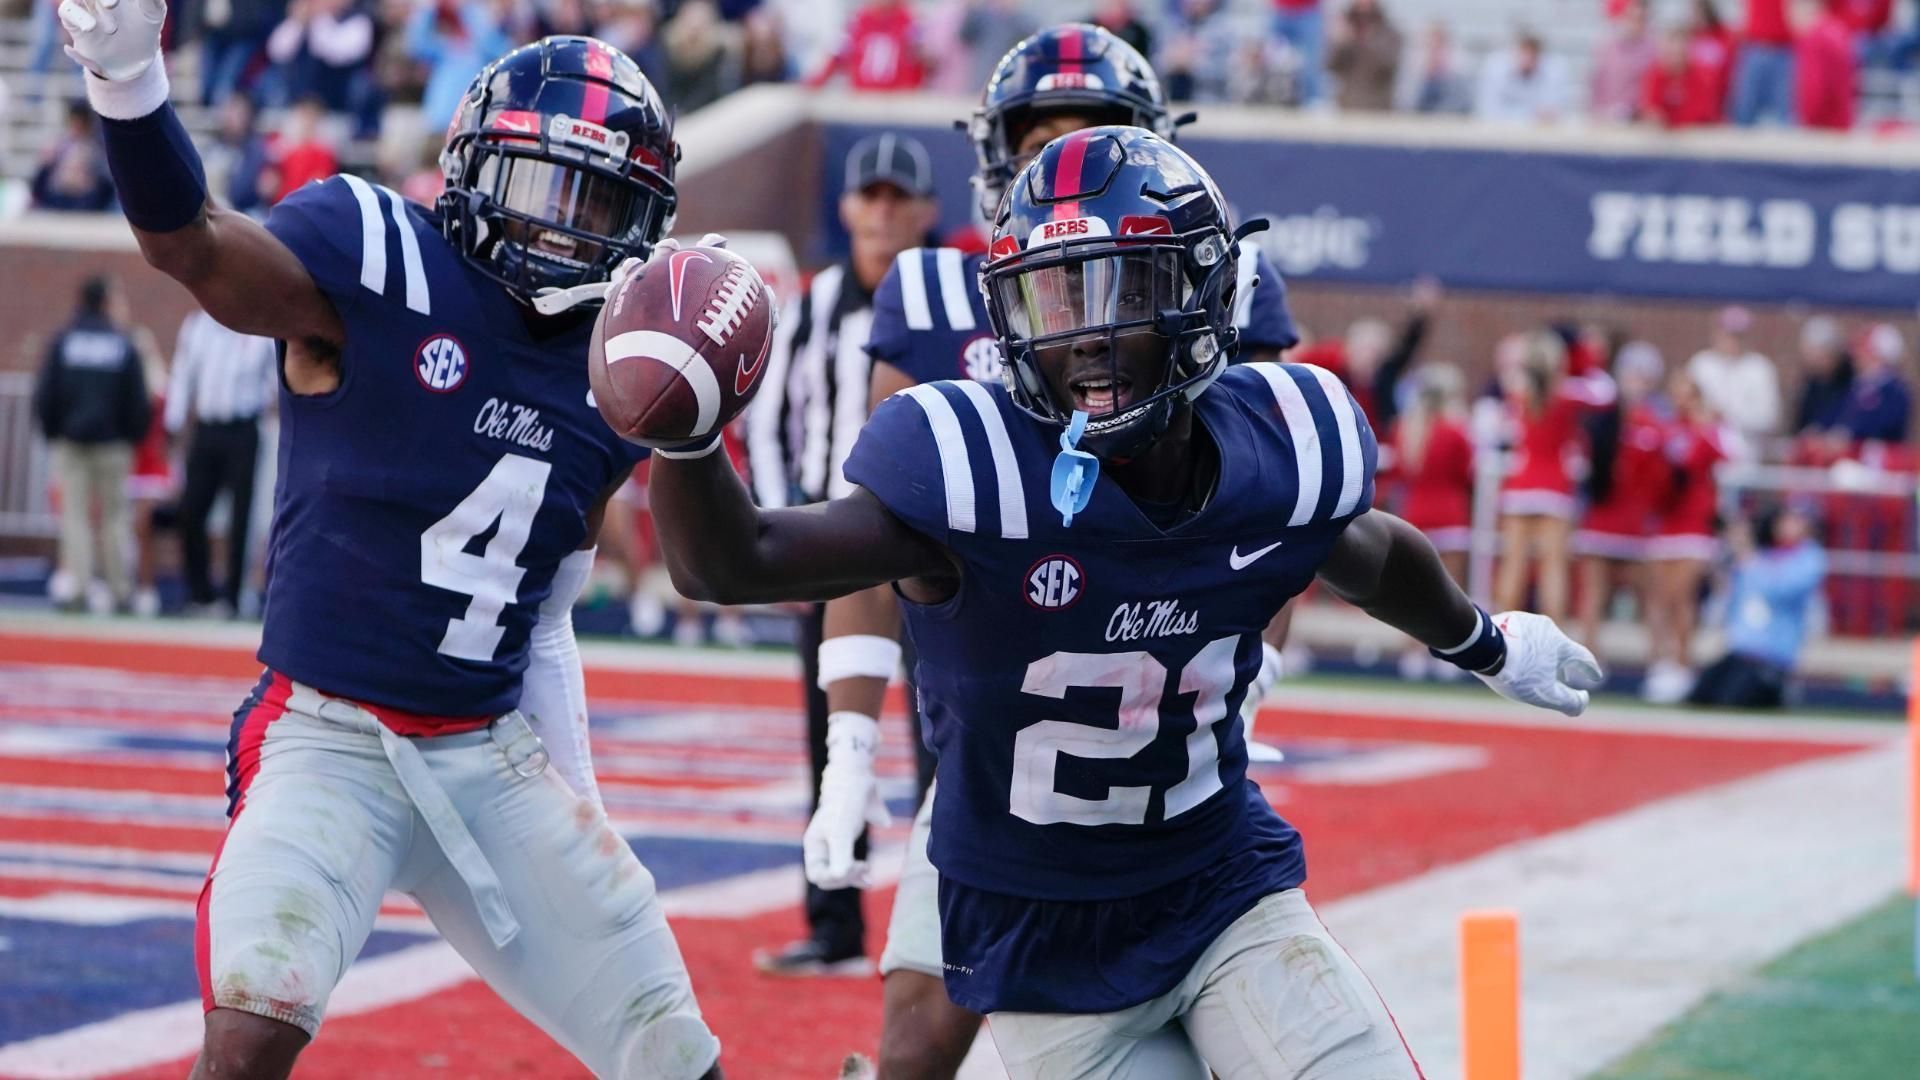 Ole Miss cruises to victory vs. Liberty ESPN Video